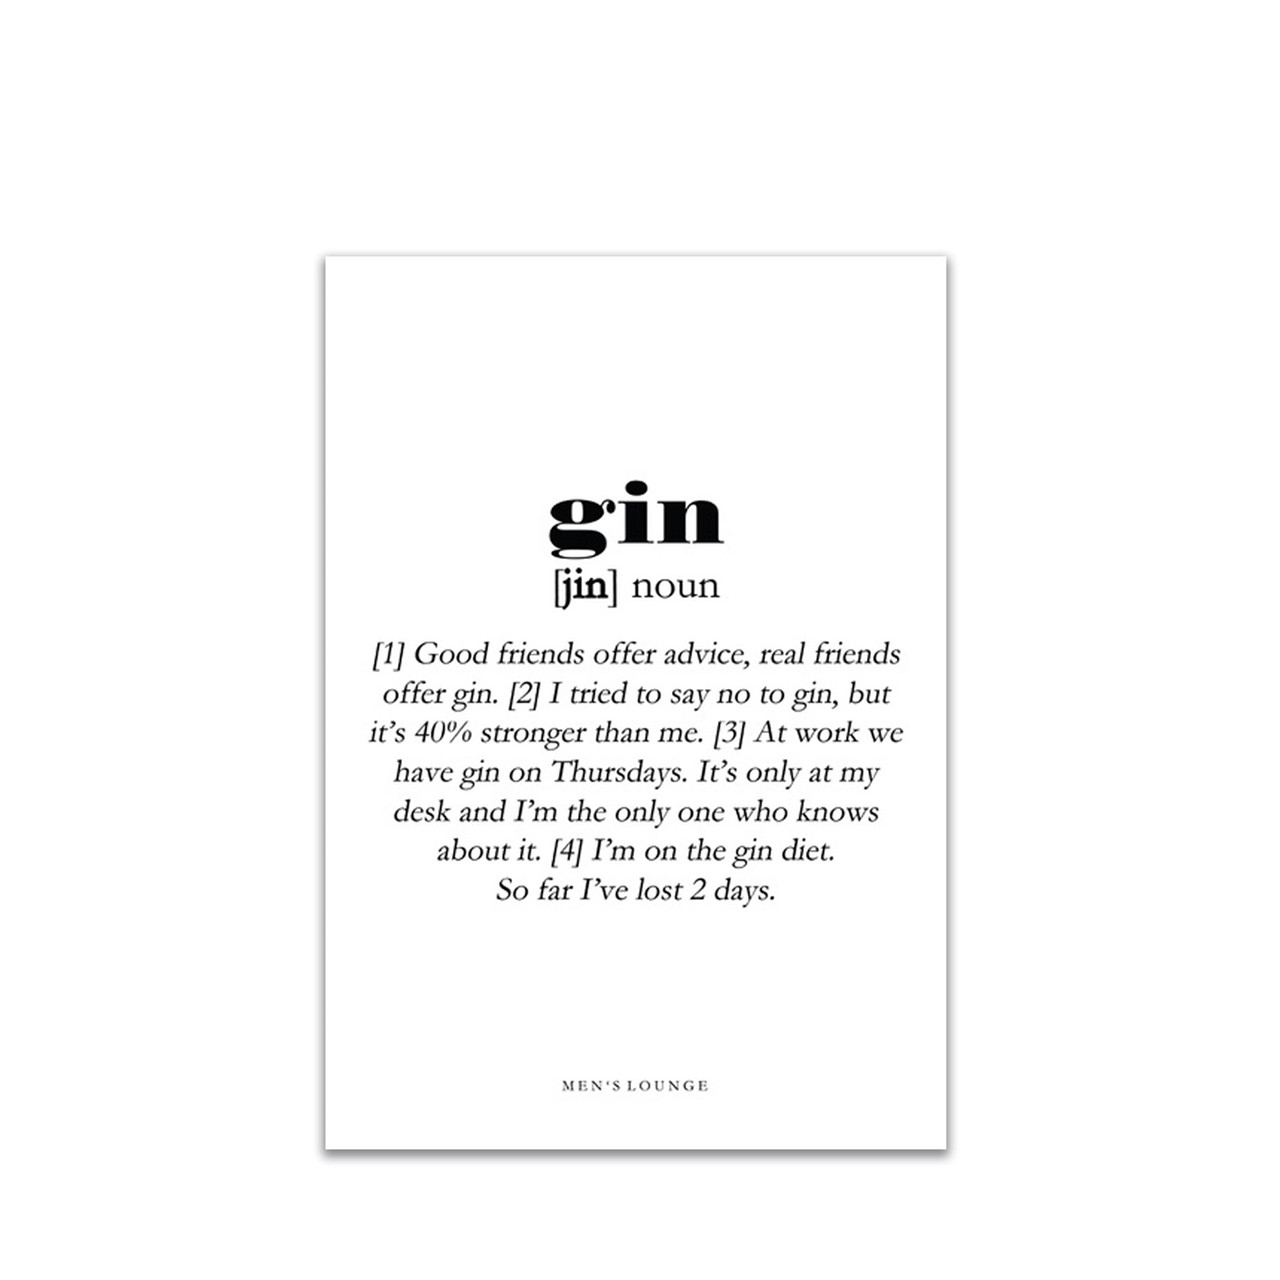 MEN’S LOUNGE Gin definition A4